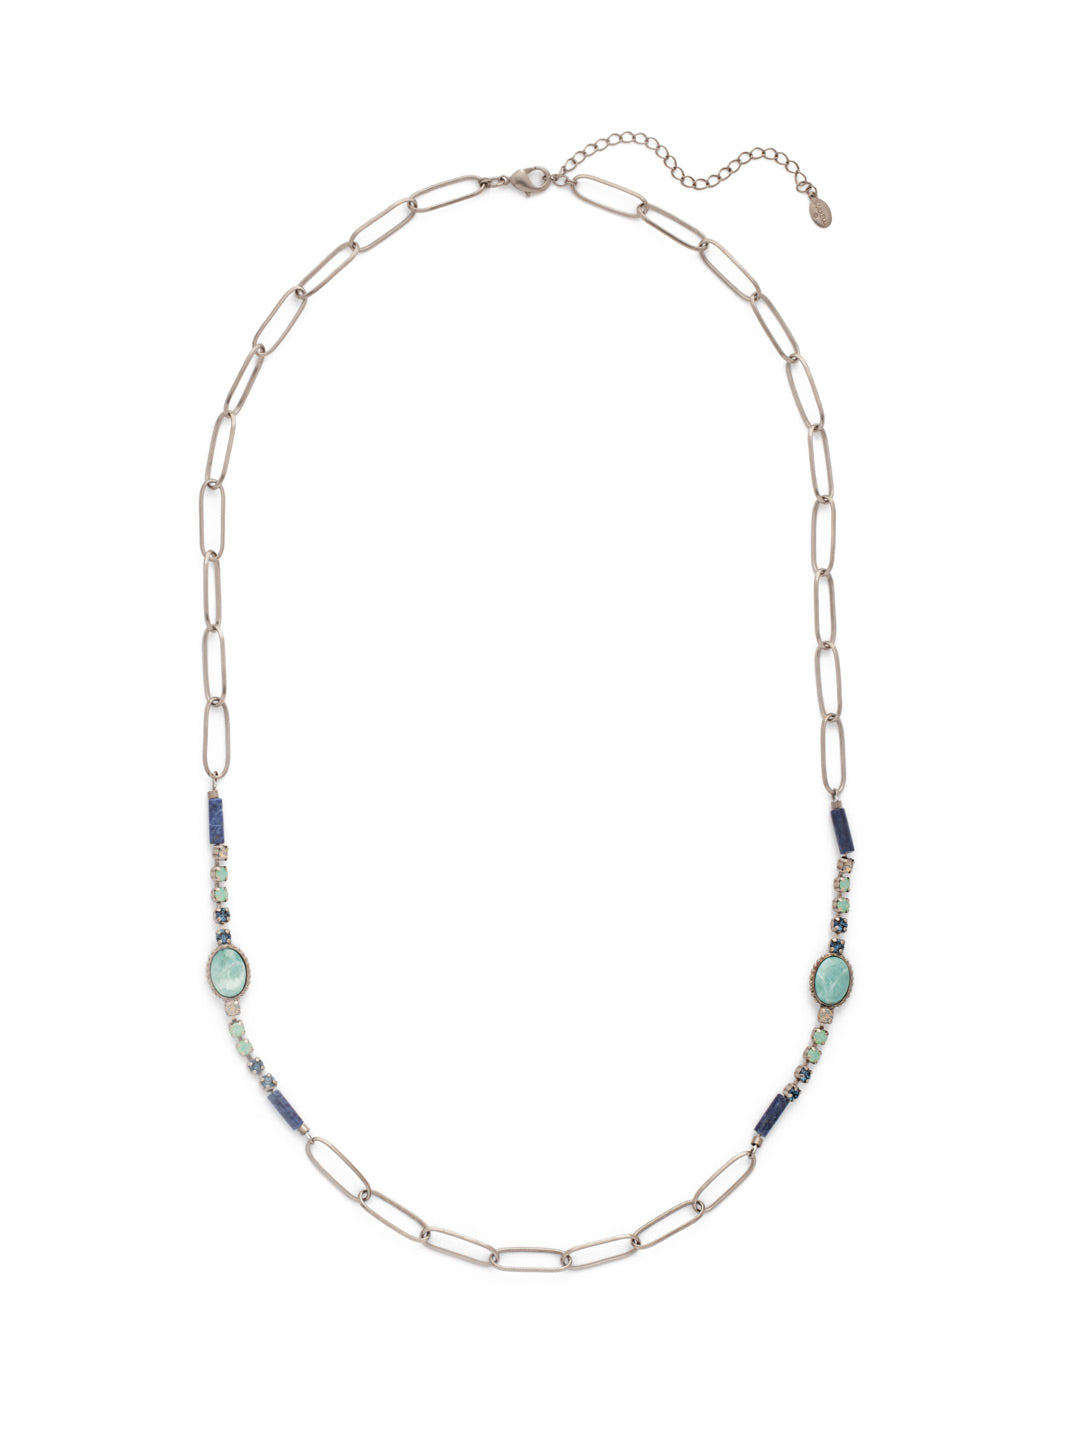 Blanche Long Necklace - NEU2ASNFT - <p>A fun layering piece, our Blanche Long Necklace has a touch of open metal loops, unique bead and stonework, and just the right amount of sparkling crystal gems. From Sorrelli's Night Frost collection in our Antique Silver-tone finish.</p>